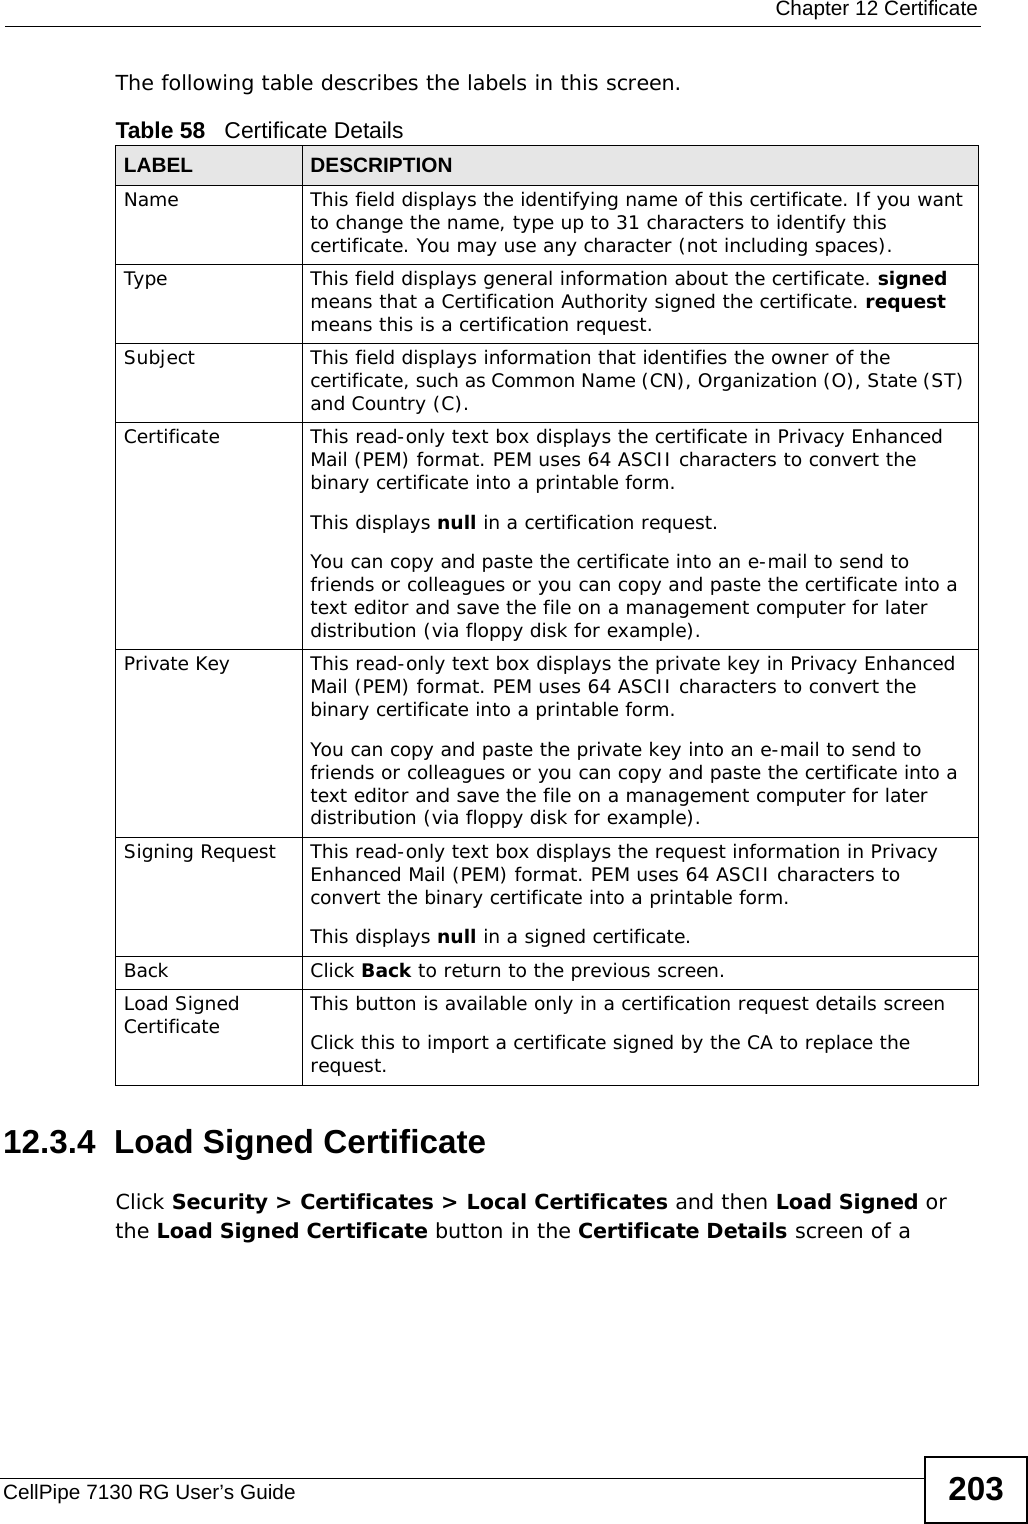  Chapter 12 CertificateCellPipe 7130 RG User’s Guide 203The following table describes the labels in this screen. 12.3.4  Load Signed CertificateClick Security &gt; Certificates &gt; Local Certificates and then Load Signed or the Load Signed Certificate button in the Certificate Details screen of a Table 58   Certificate DetailsLABEL DESCRIPTIONName This field displays the identifying name of this certificate. If you want to change the name, type up to 31 characters to identify this certificate. You may use any character (not including spaces).Type This field displays general information about the certificate. signed means that a Certification Authority signed the certificate. request means this is a certification request.  Subject This field displays information that identifies the owner of the certificate, such as Common Name (CN), Organization (O), State (ST) and Country (C).Certificate This read-only text box displays the certificate in Privacy Enhanced Mail (PEM) format. PEM uses 64 ASCII characters to convert the binary certificate into a printable form. This displays null in a certification request.You can copy and paste the certificate into an e-mail to send to friends or colleagues or you can copy and paste the certificate into a text editor and save the file on a management computer for later distribution (via floppy disk for example).Private Key This read-only text box displays the private key in Privacy Enhanced Mail (PEM) format. PEM uses 64 ASCII characters to convert the binary certificate into a printable form. You can copy and paste the private key into an e-mail to send to friends or colleagues or you can copy and paste the certificate into a text editor and save the file on a management computer for later distribution (via floppy disk for example).Signing Request This read-only text box displays the request information in Privacy Enhanced Mail (PEM) format. PEM uses 64 ASCII characters to convert the binary certificate into a printable form. This displays null in a signed certificate.Back Click Back to return to the previous screen.Load Signed Certificate This button is available only in a certification request details screenClick this to import a certificate signed by the CA to replace the request.